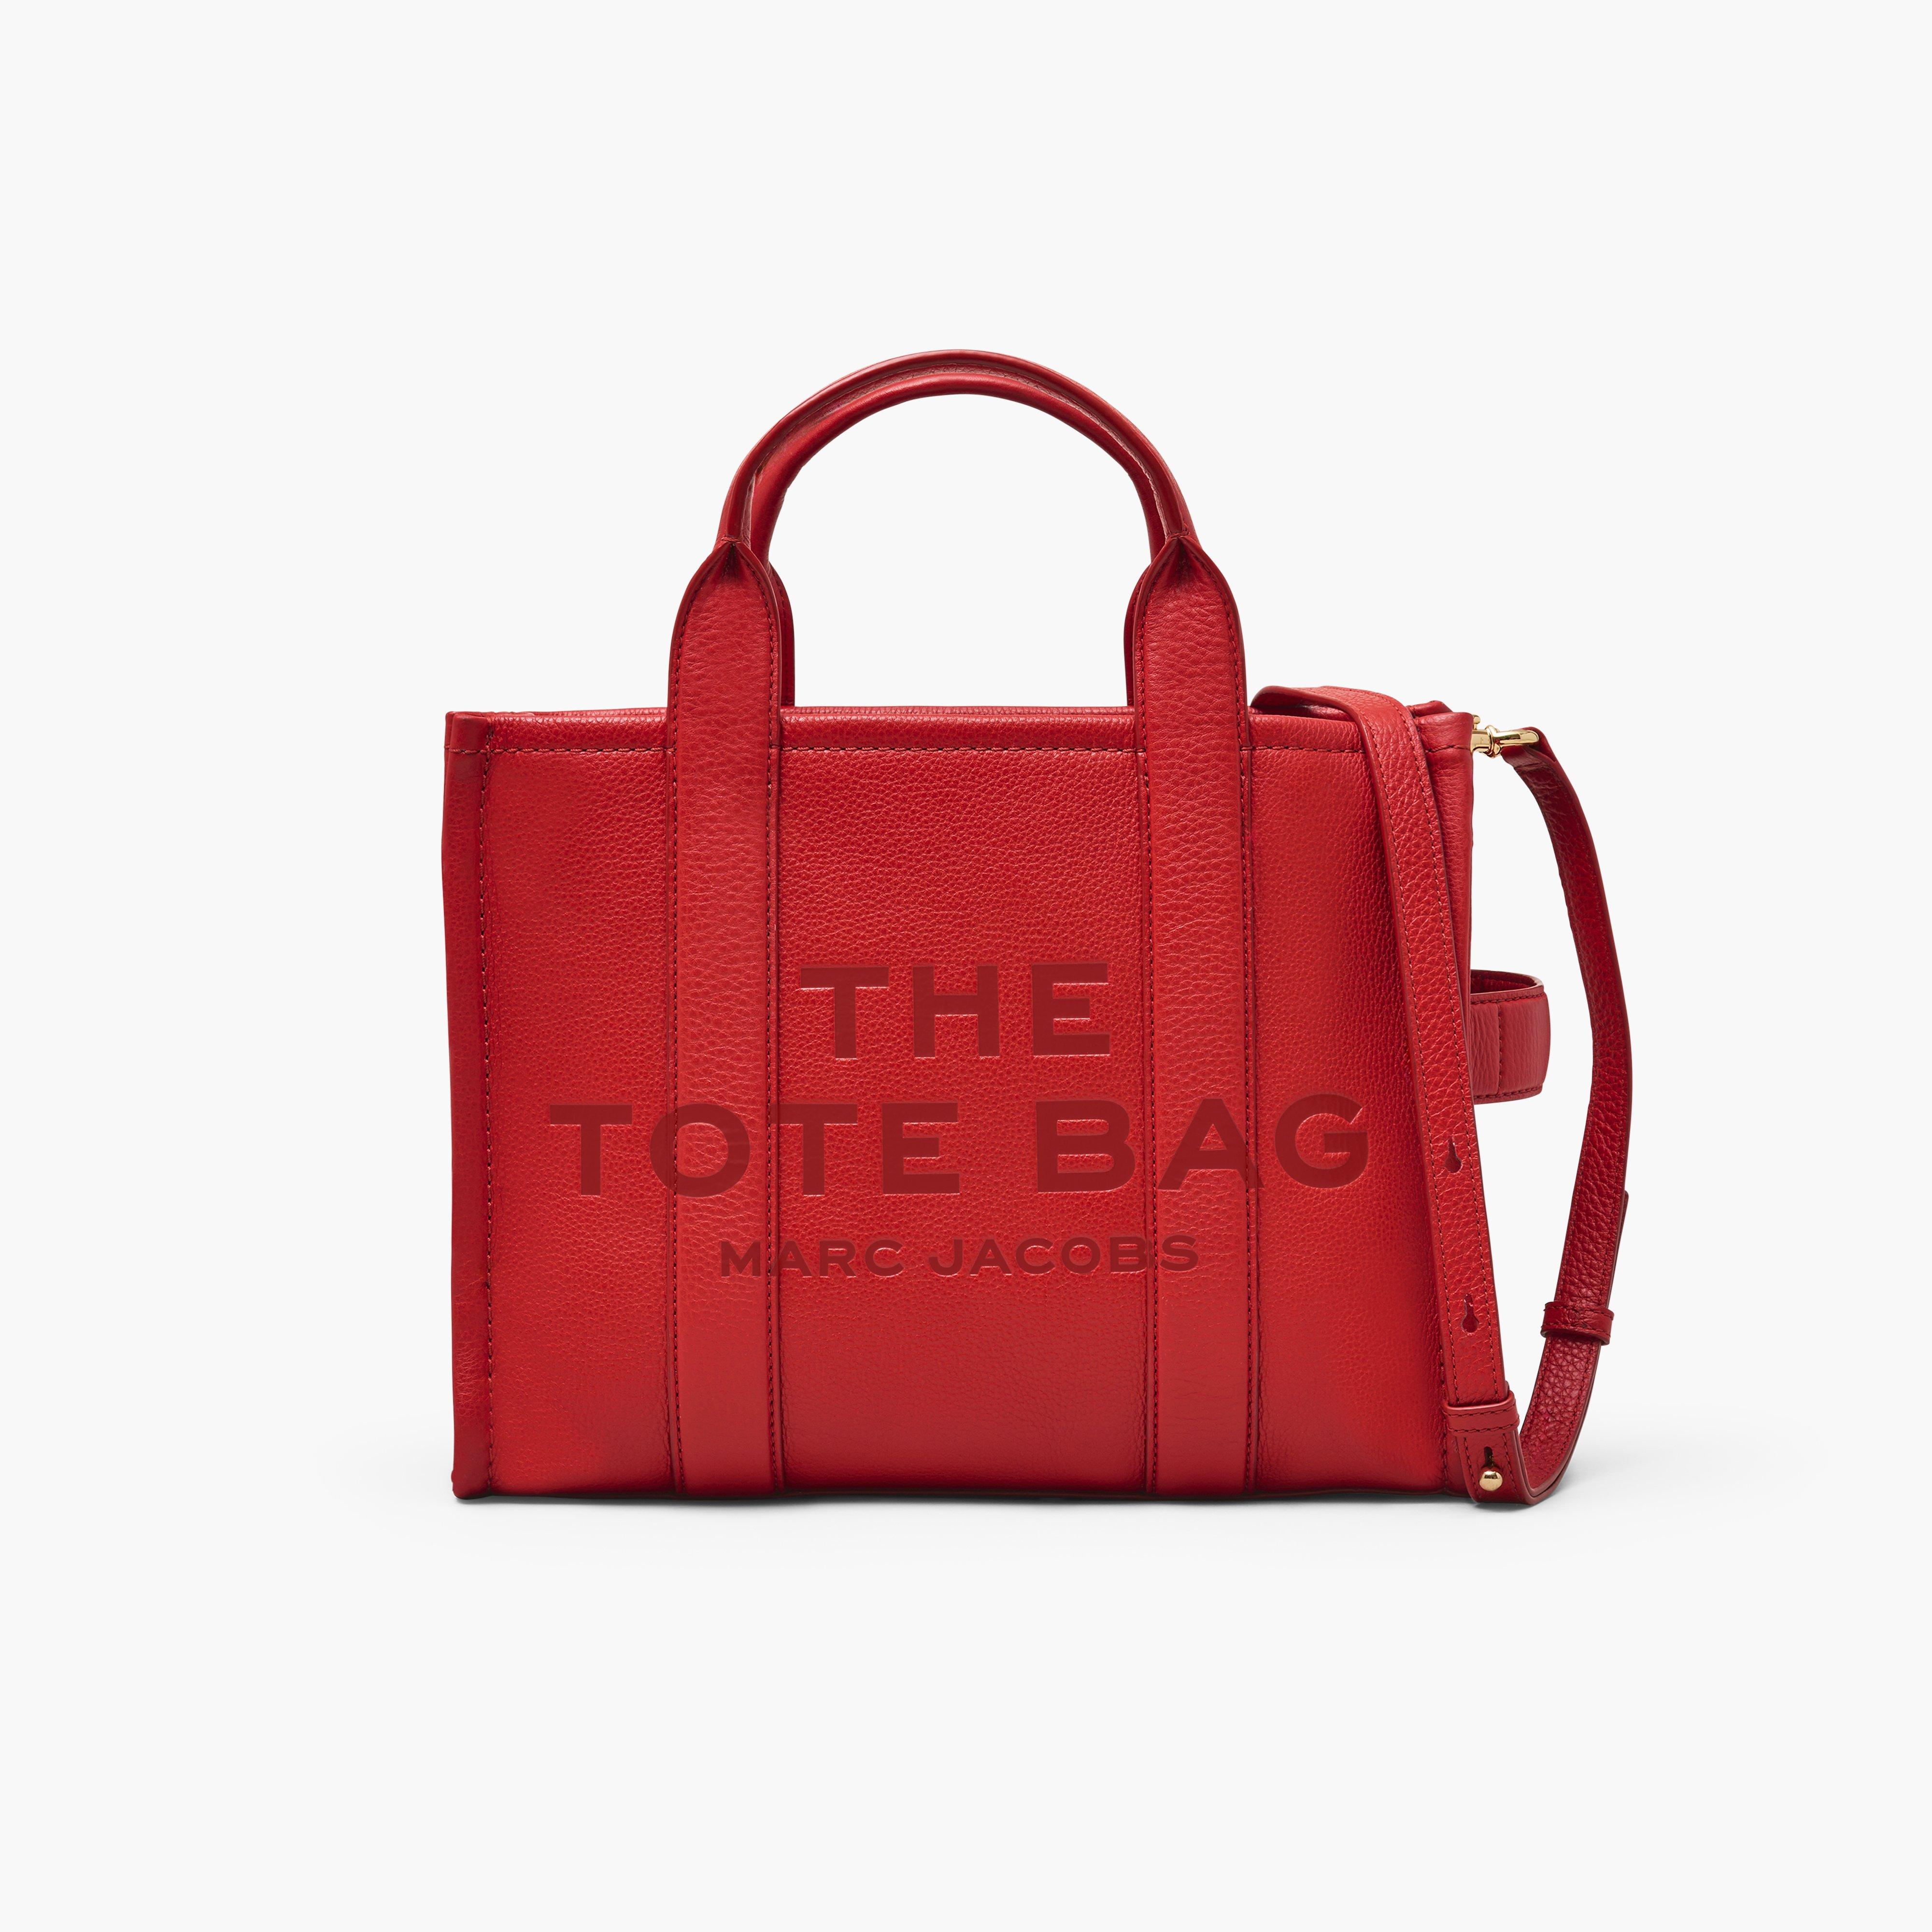 Marc by Marc jacobs The Leather Medium Tote Bag,TRUE RED